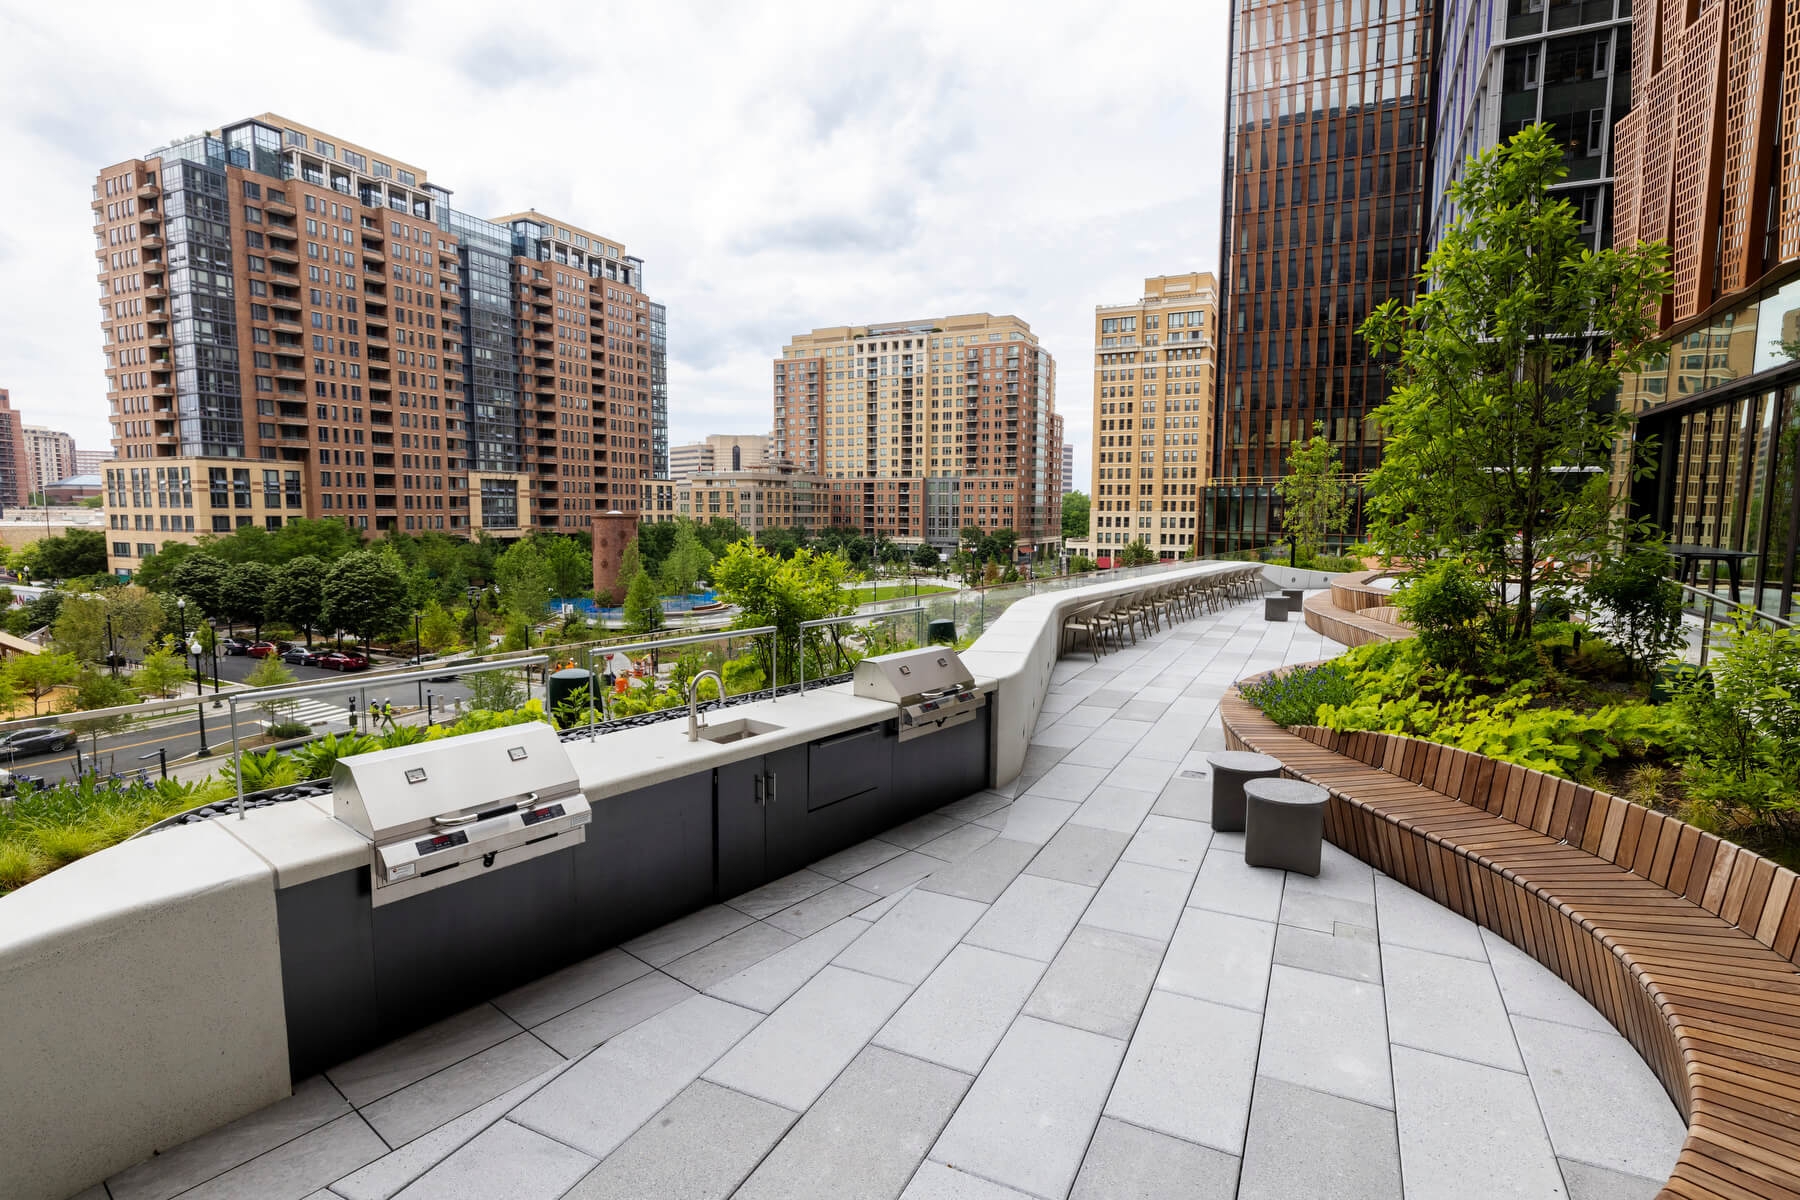 An image of a grill and several wooden seating areas on the terrace at Amazon's HQ2